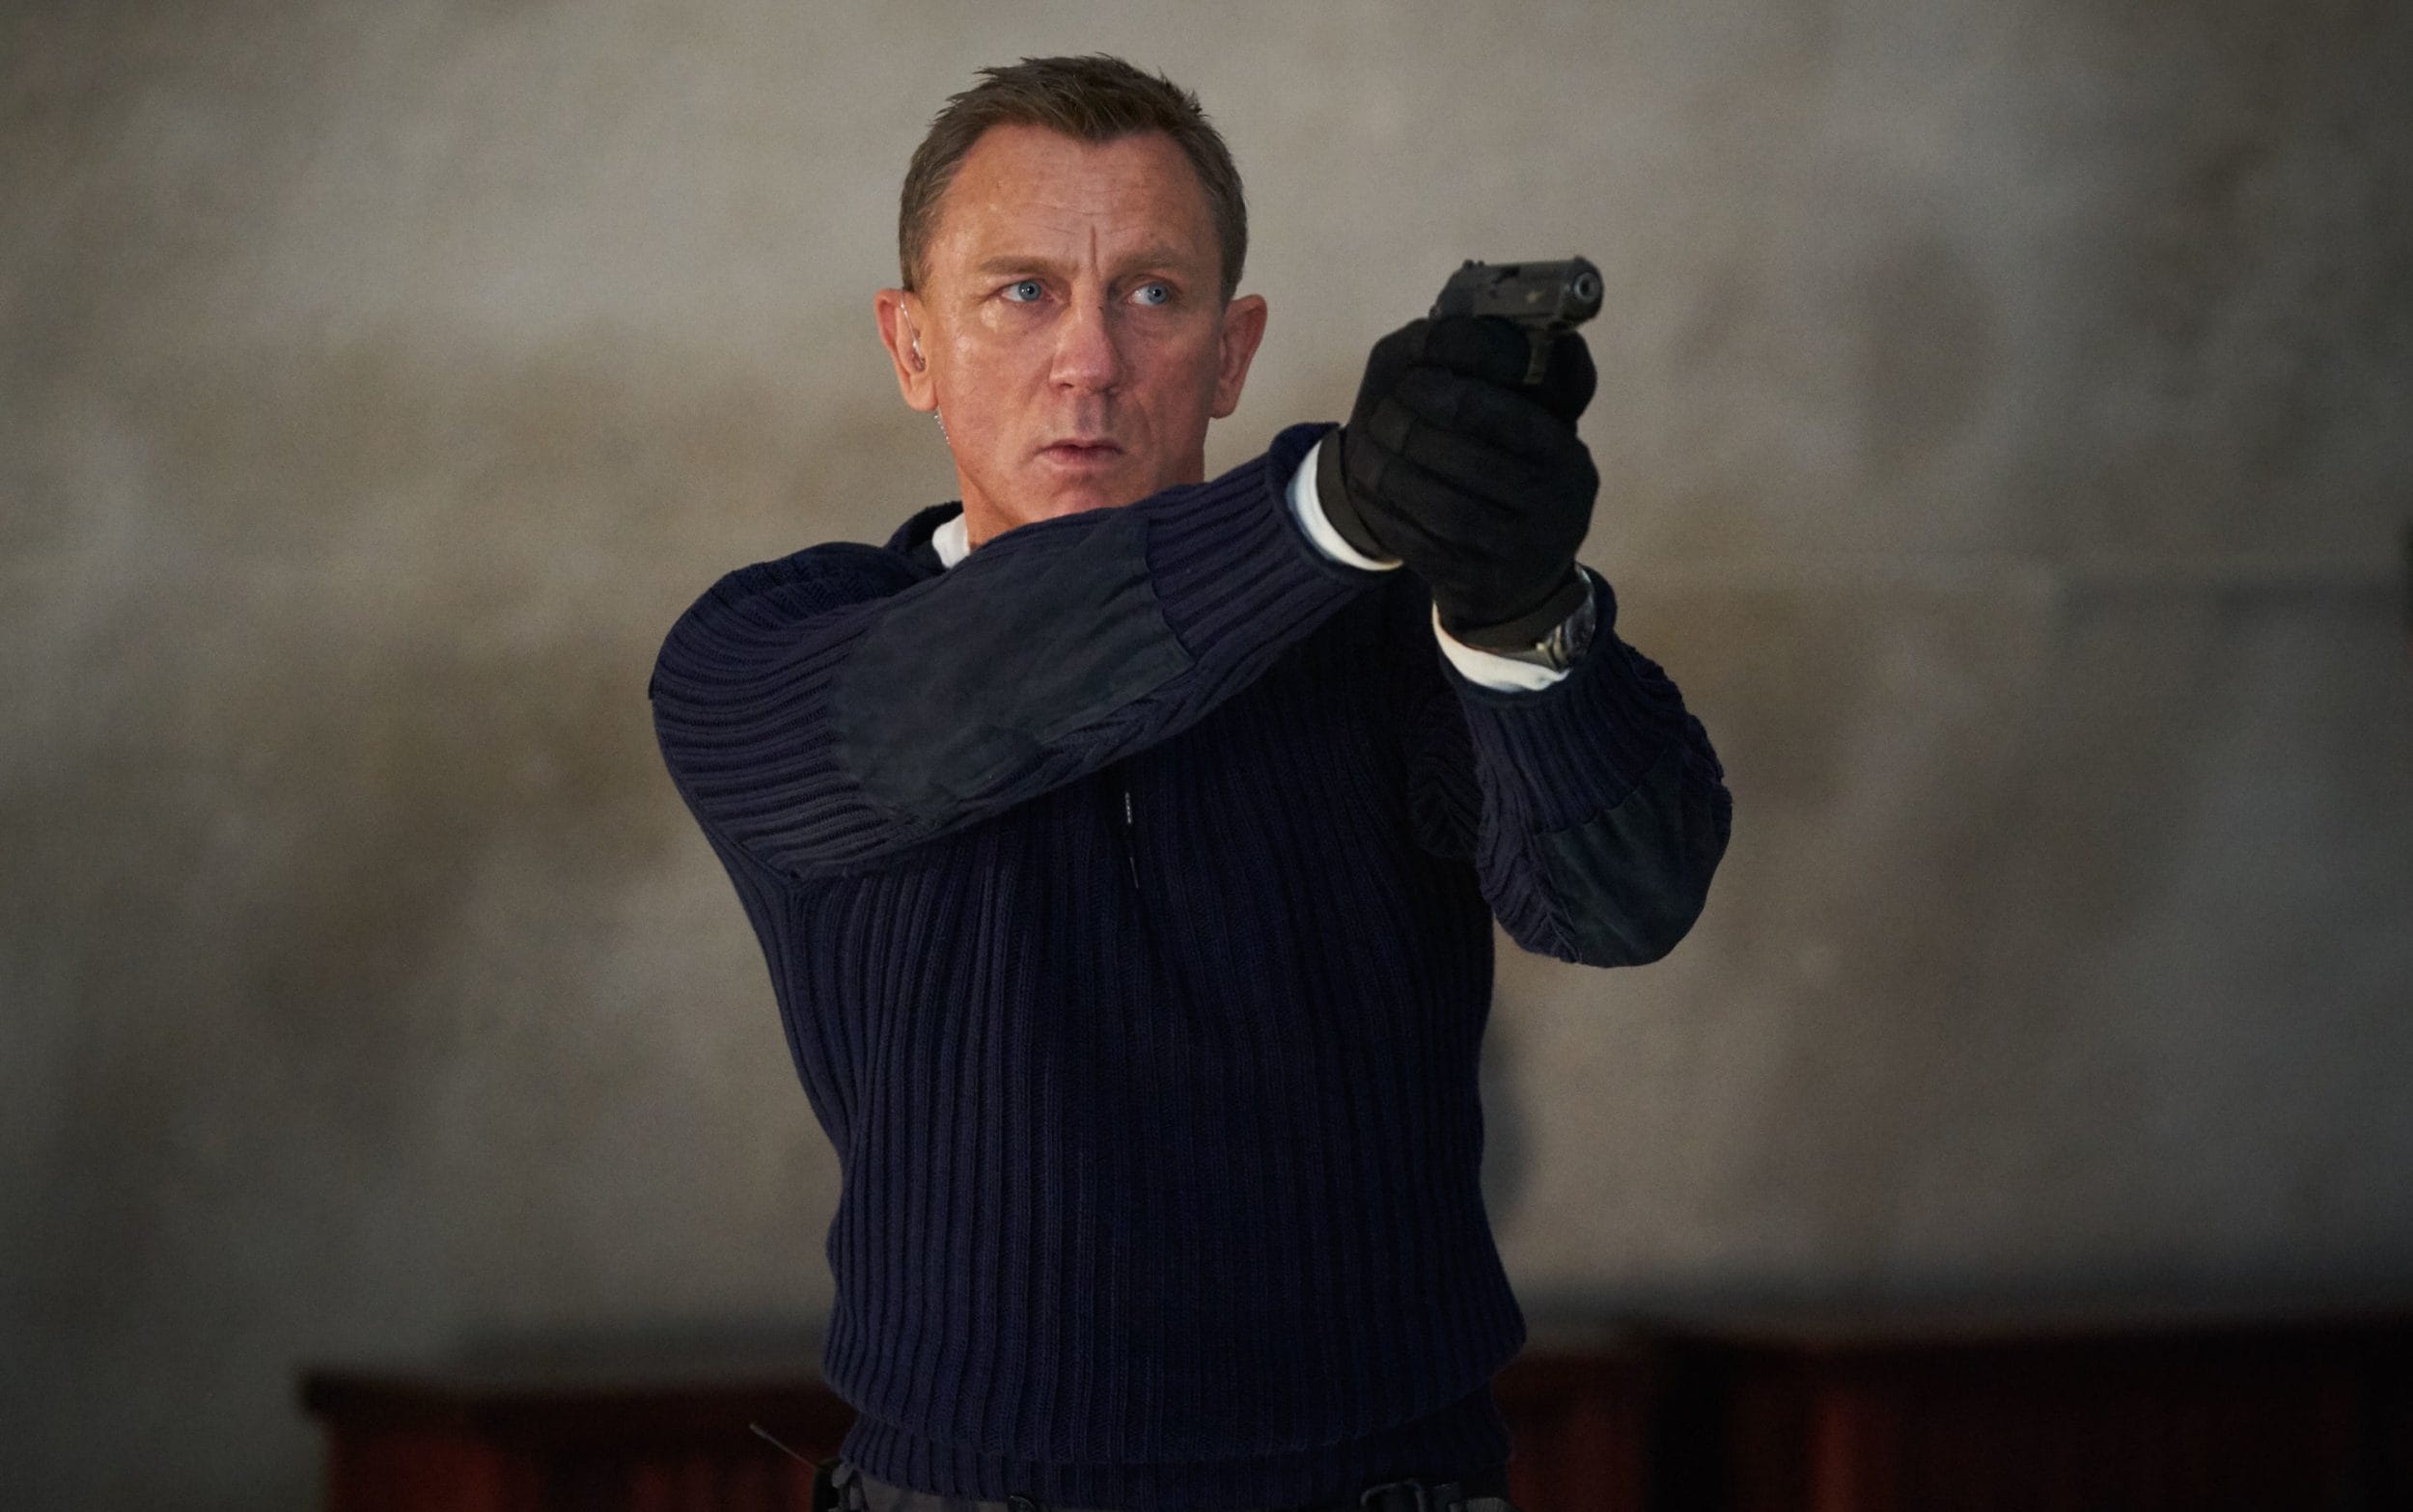 amazon, who is the new james bond? everything we know about the next 007 film